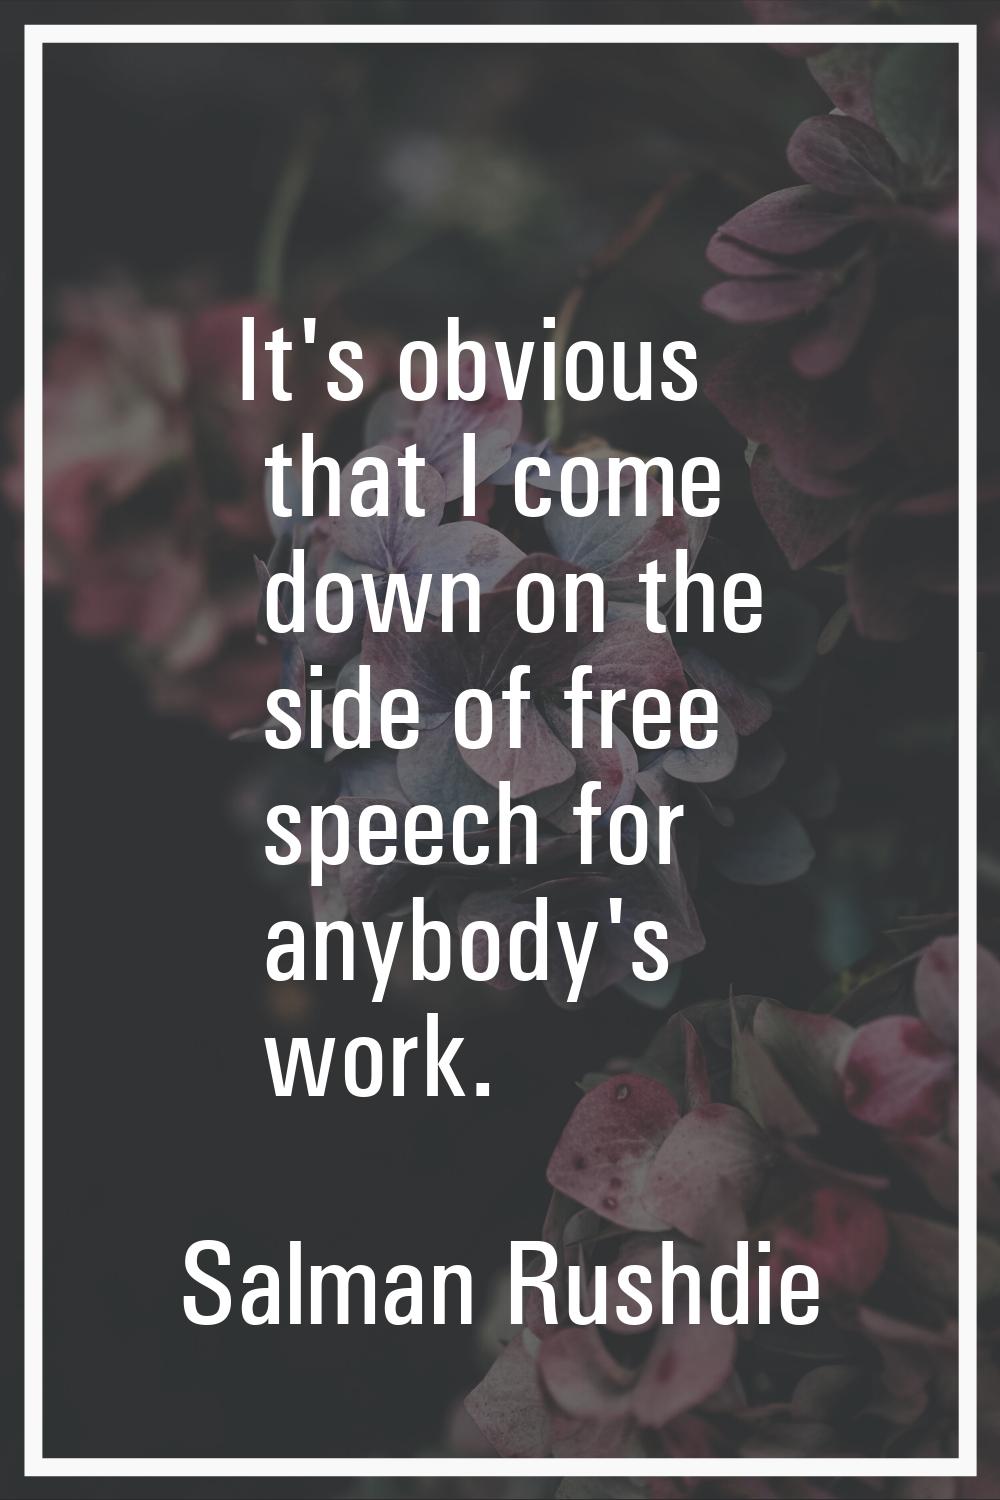 It's obvious that I come down on the side of free speech for anybody's work.